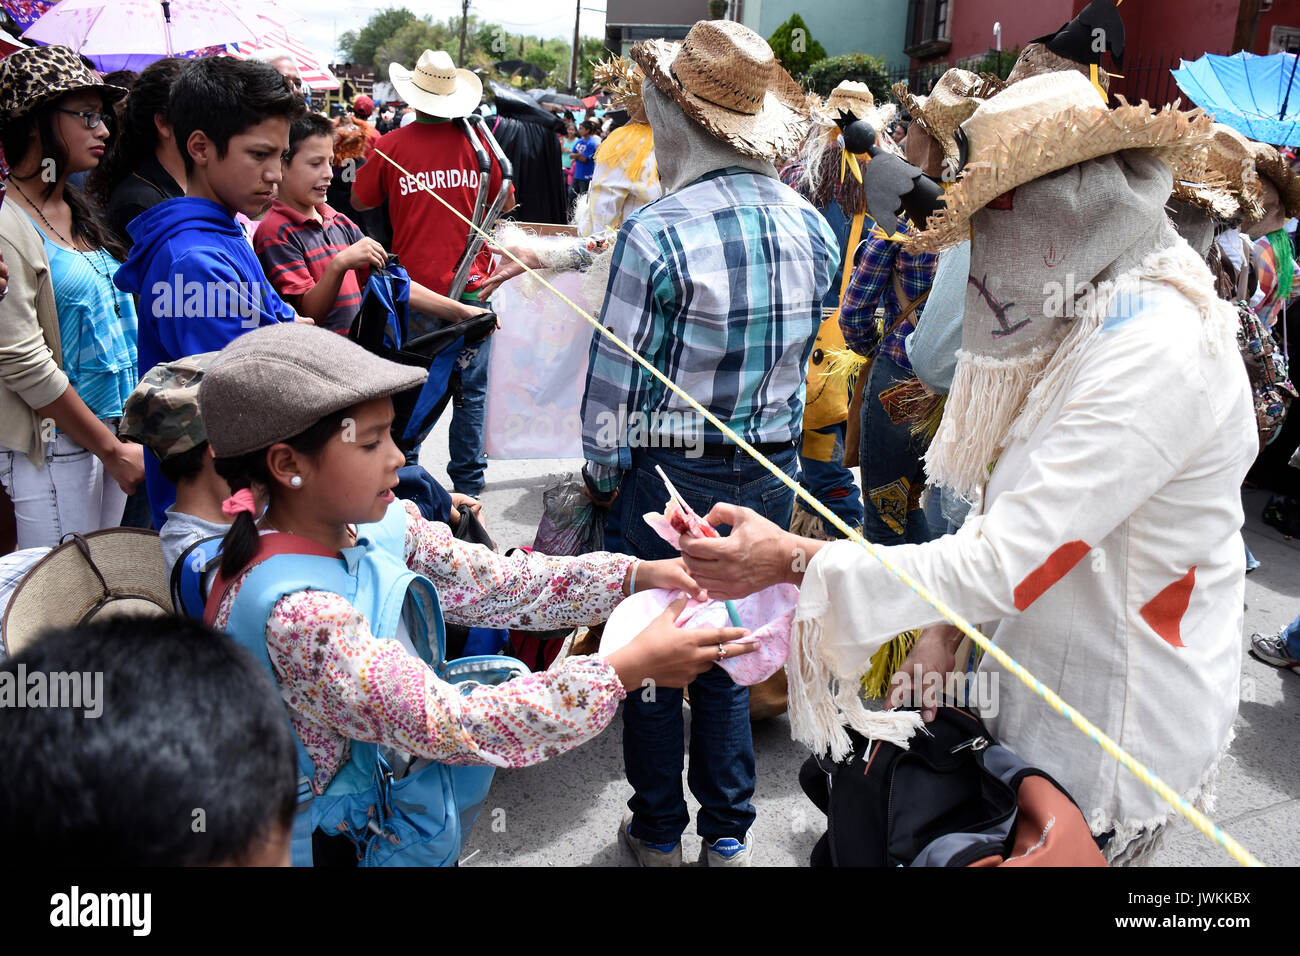 A participant dressed in colourful bizarre costume gives candies to the kids. Hundreds of people are seen participating during the annual parade of The Crazy Ones, a traditional  parade to celebrate welcome of the Holiday of San Antonio. Stock Photo